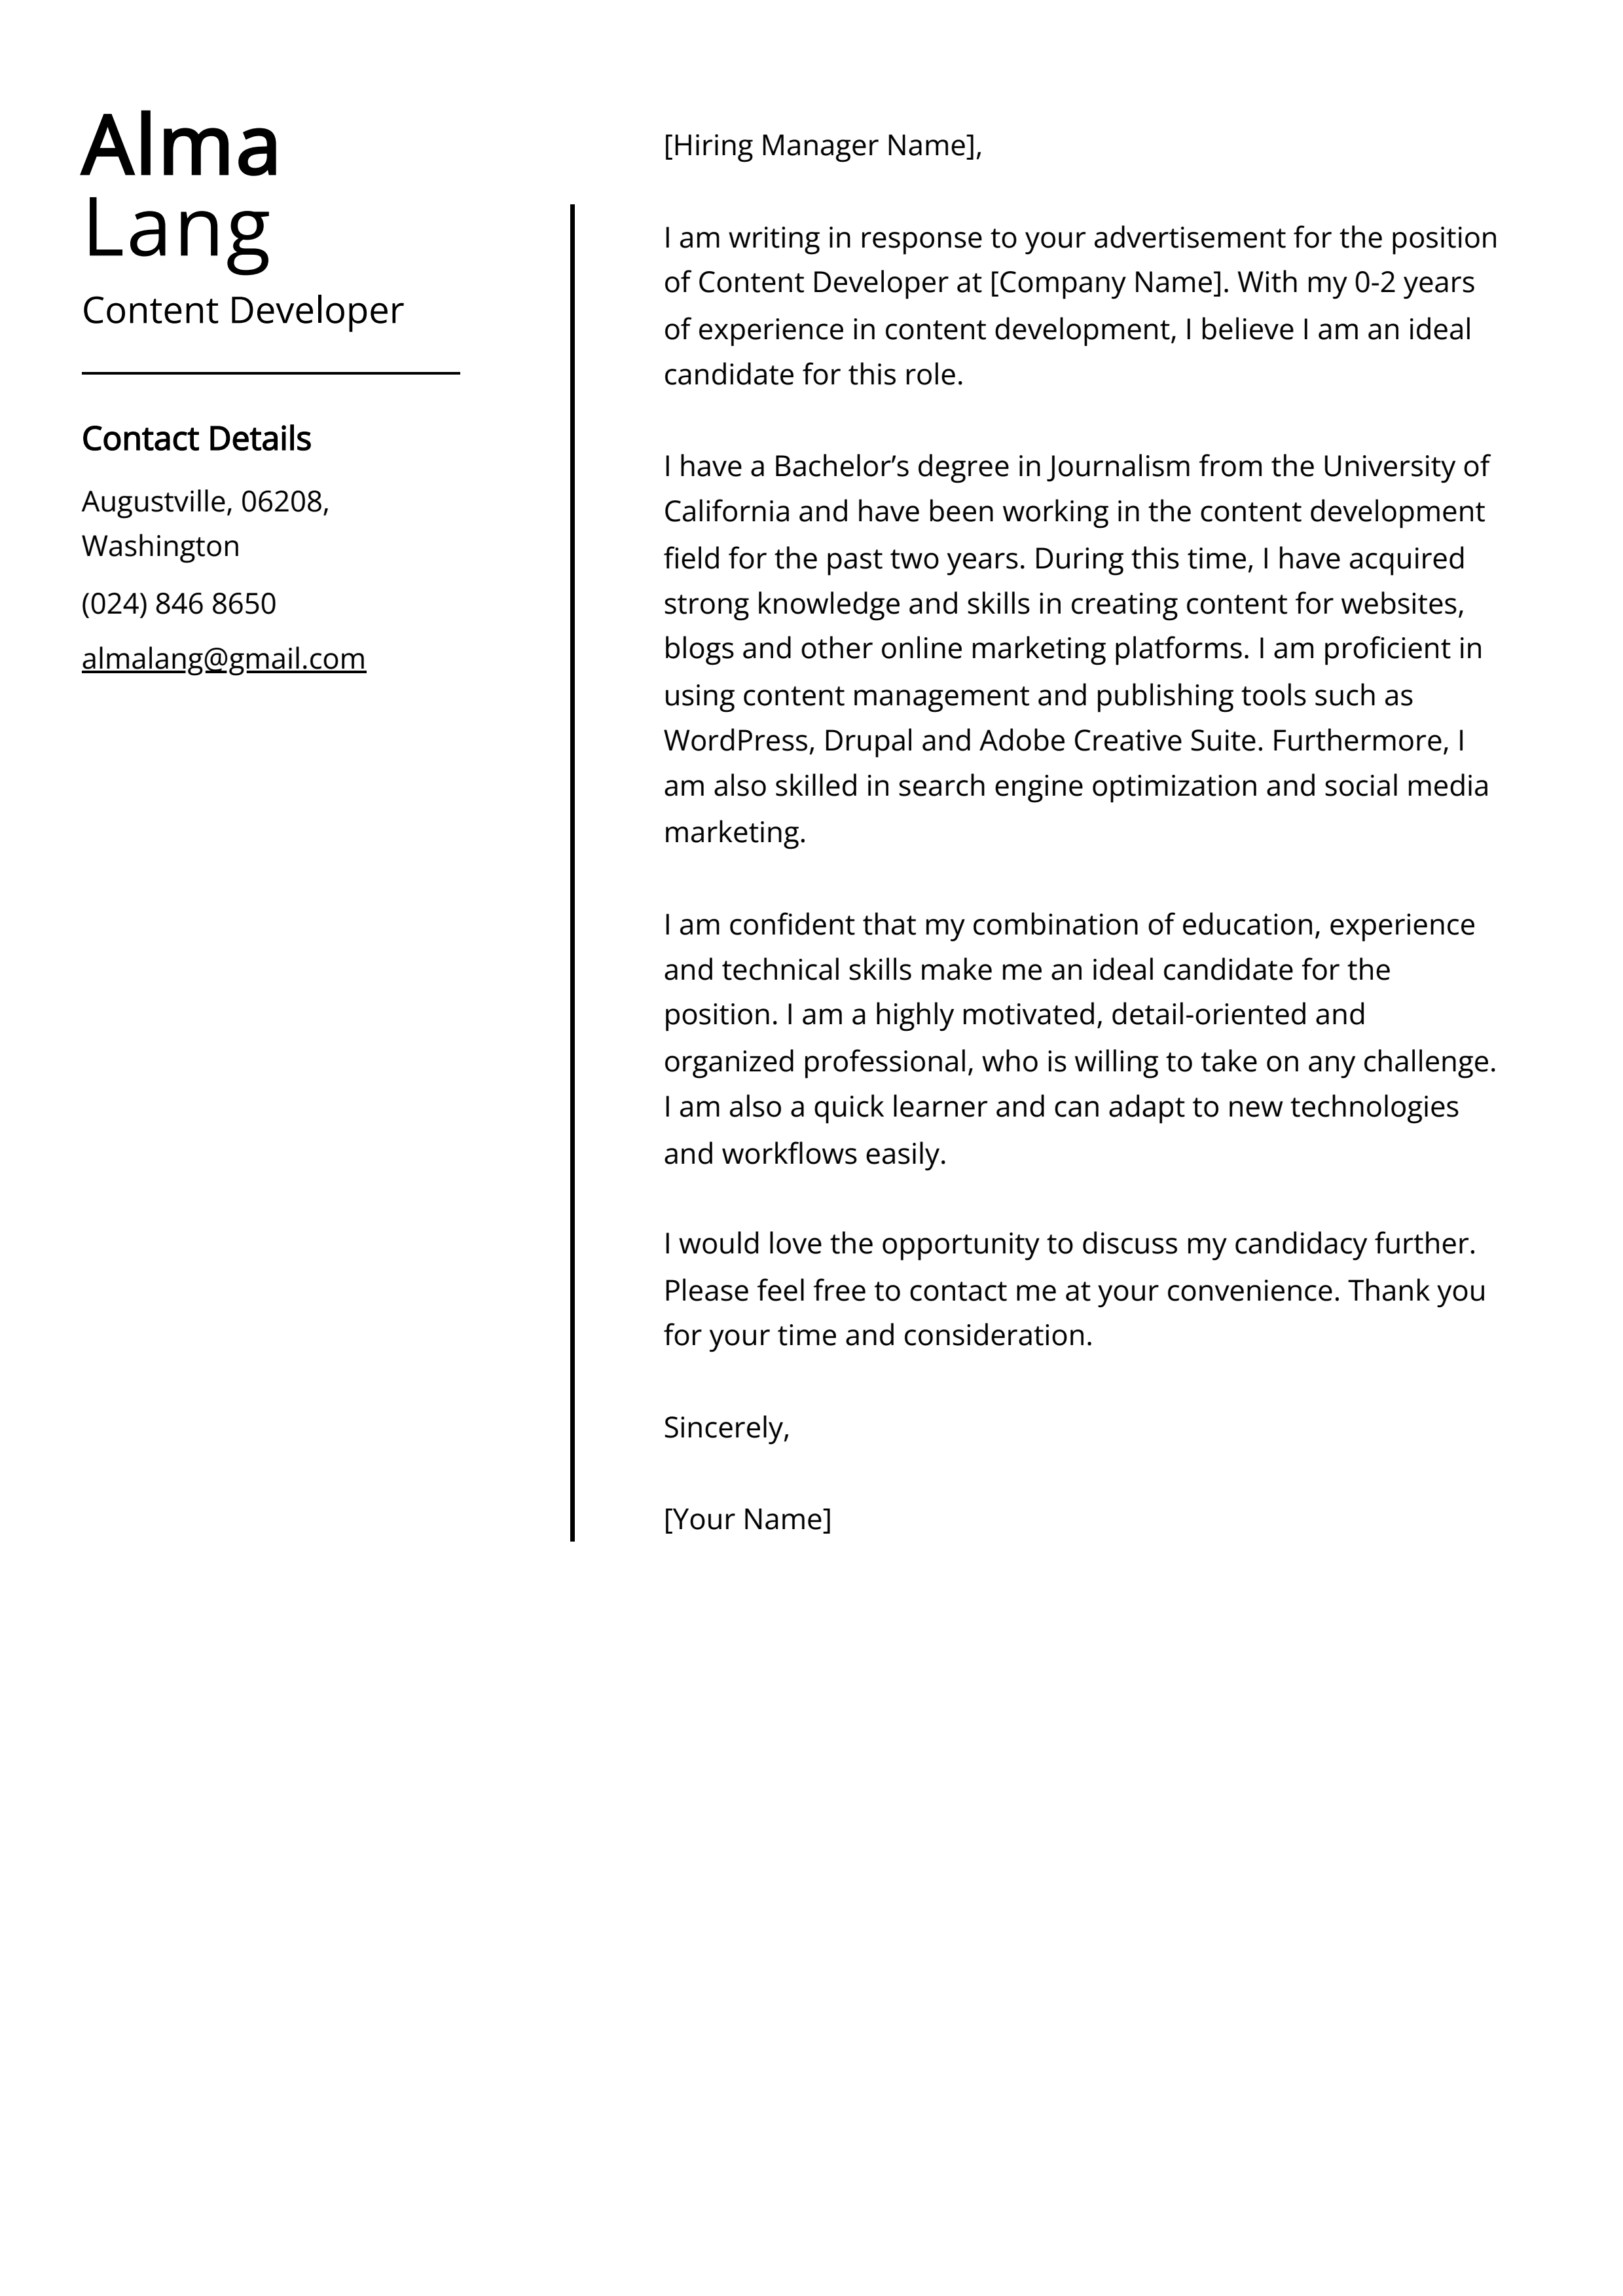 Content Developer Cover Letter Example